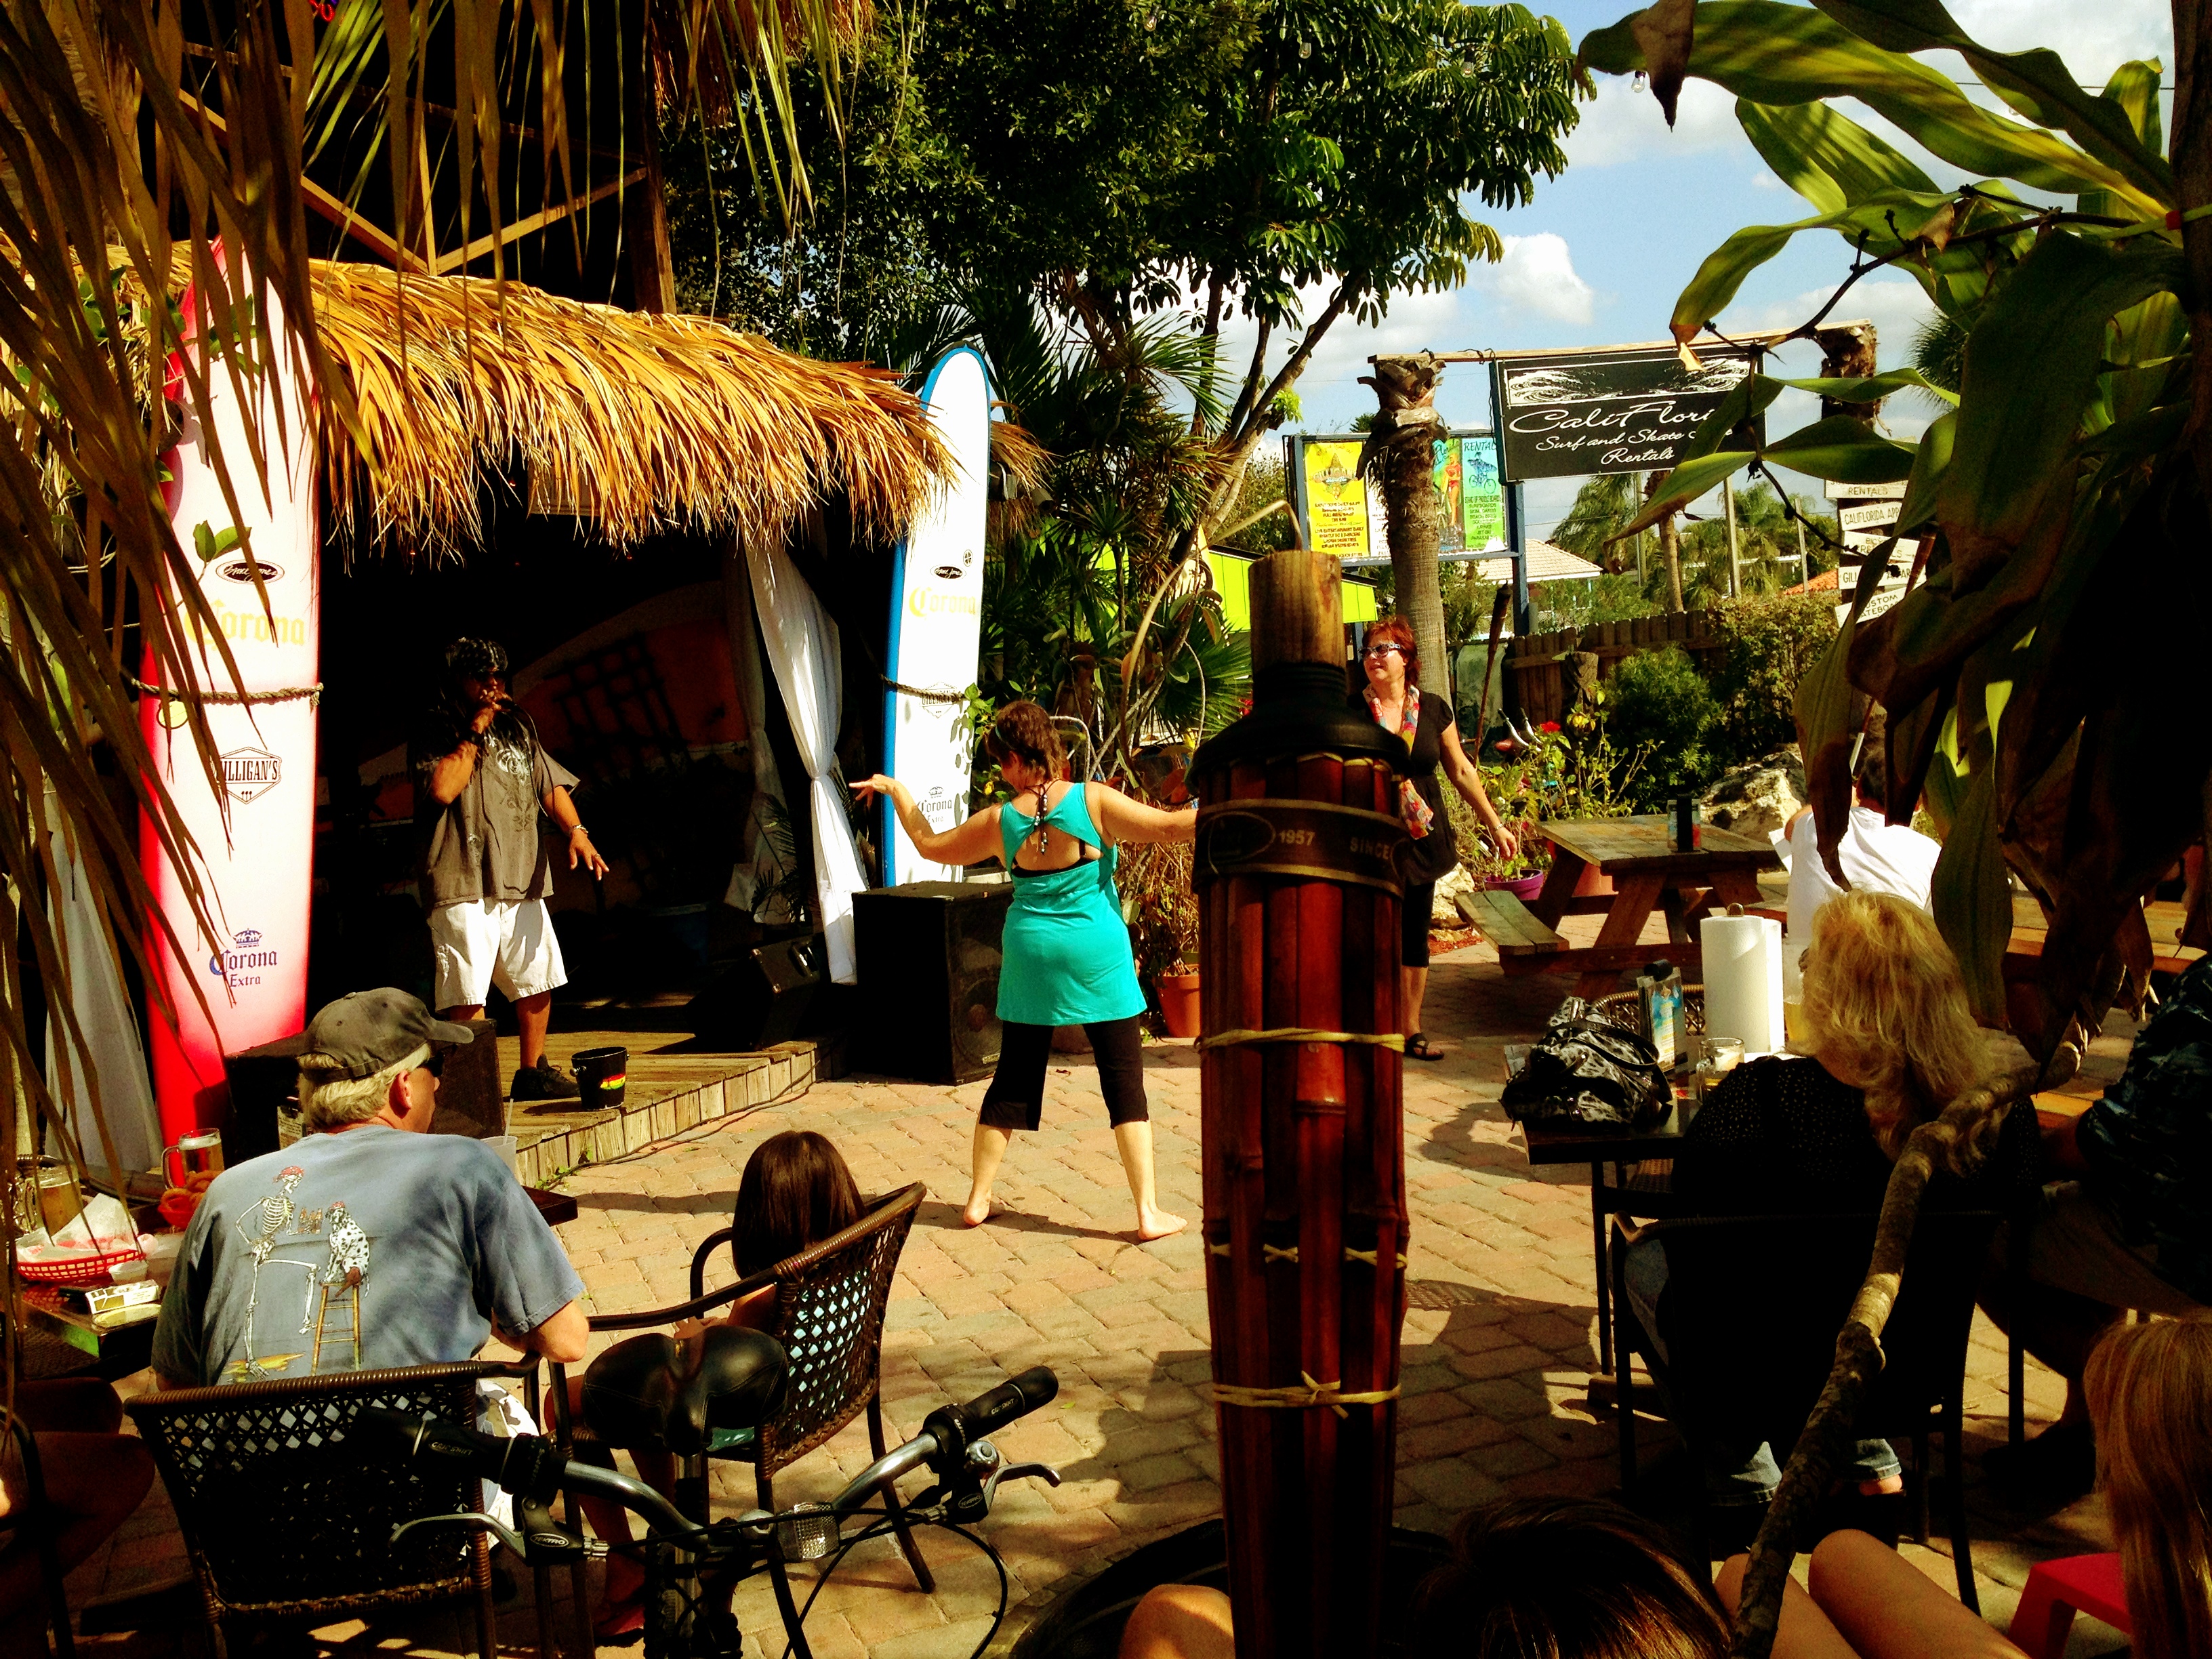 Reggae music and dancing in the afternoon at LēLu Coffee Lounge.